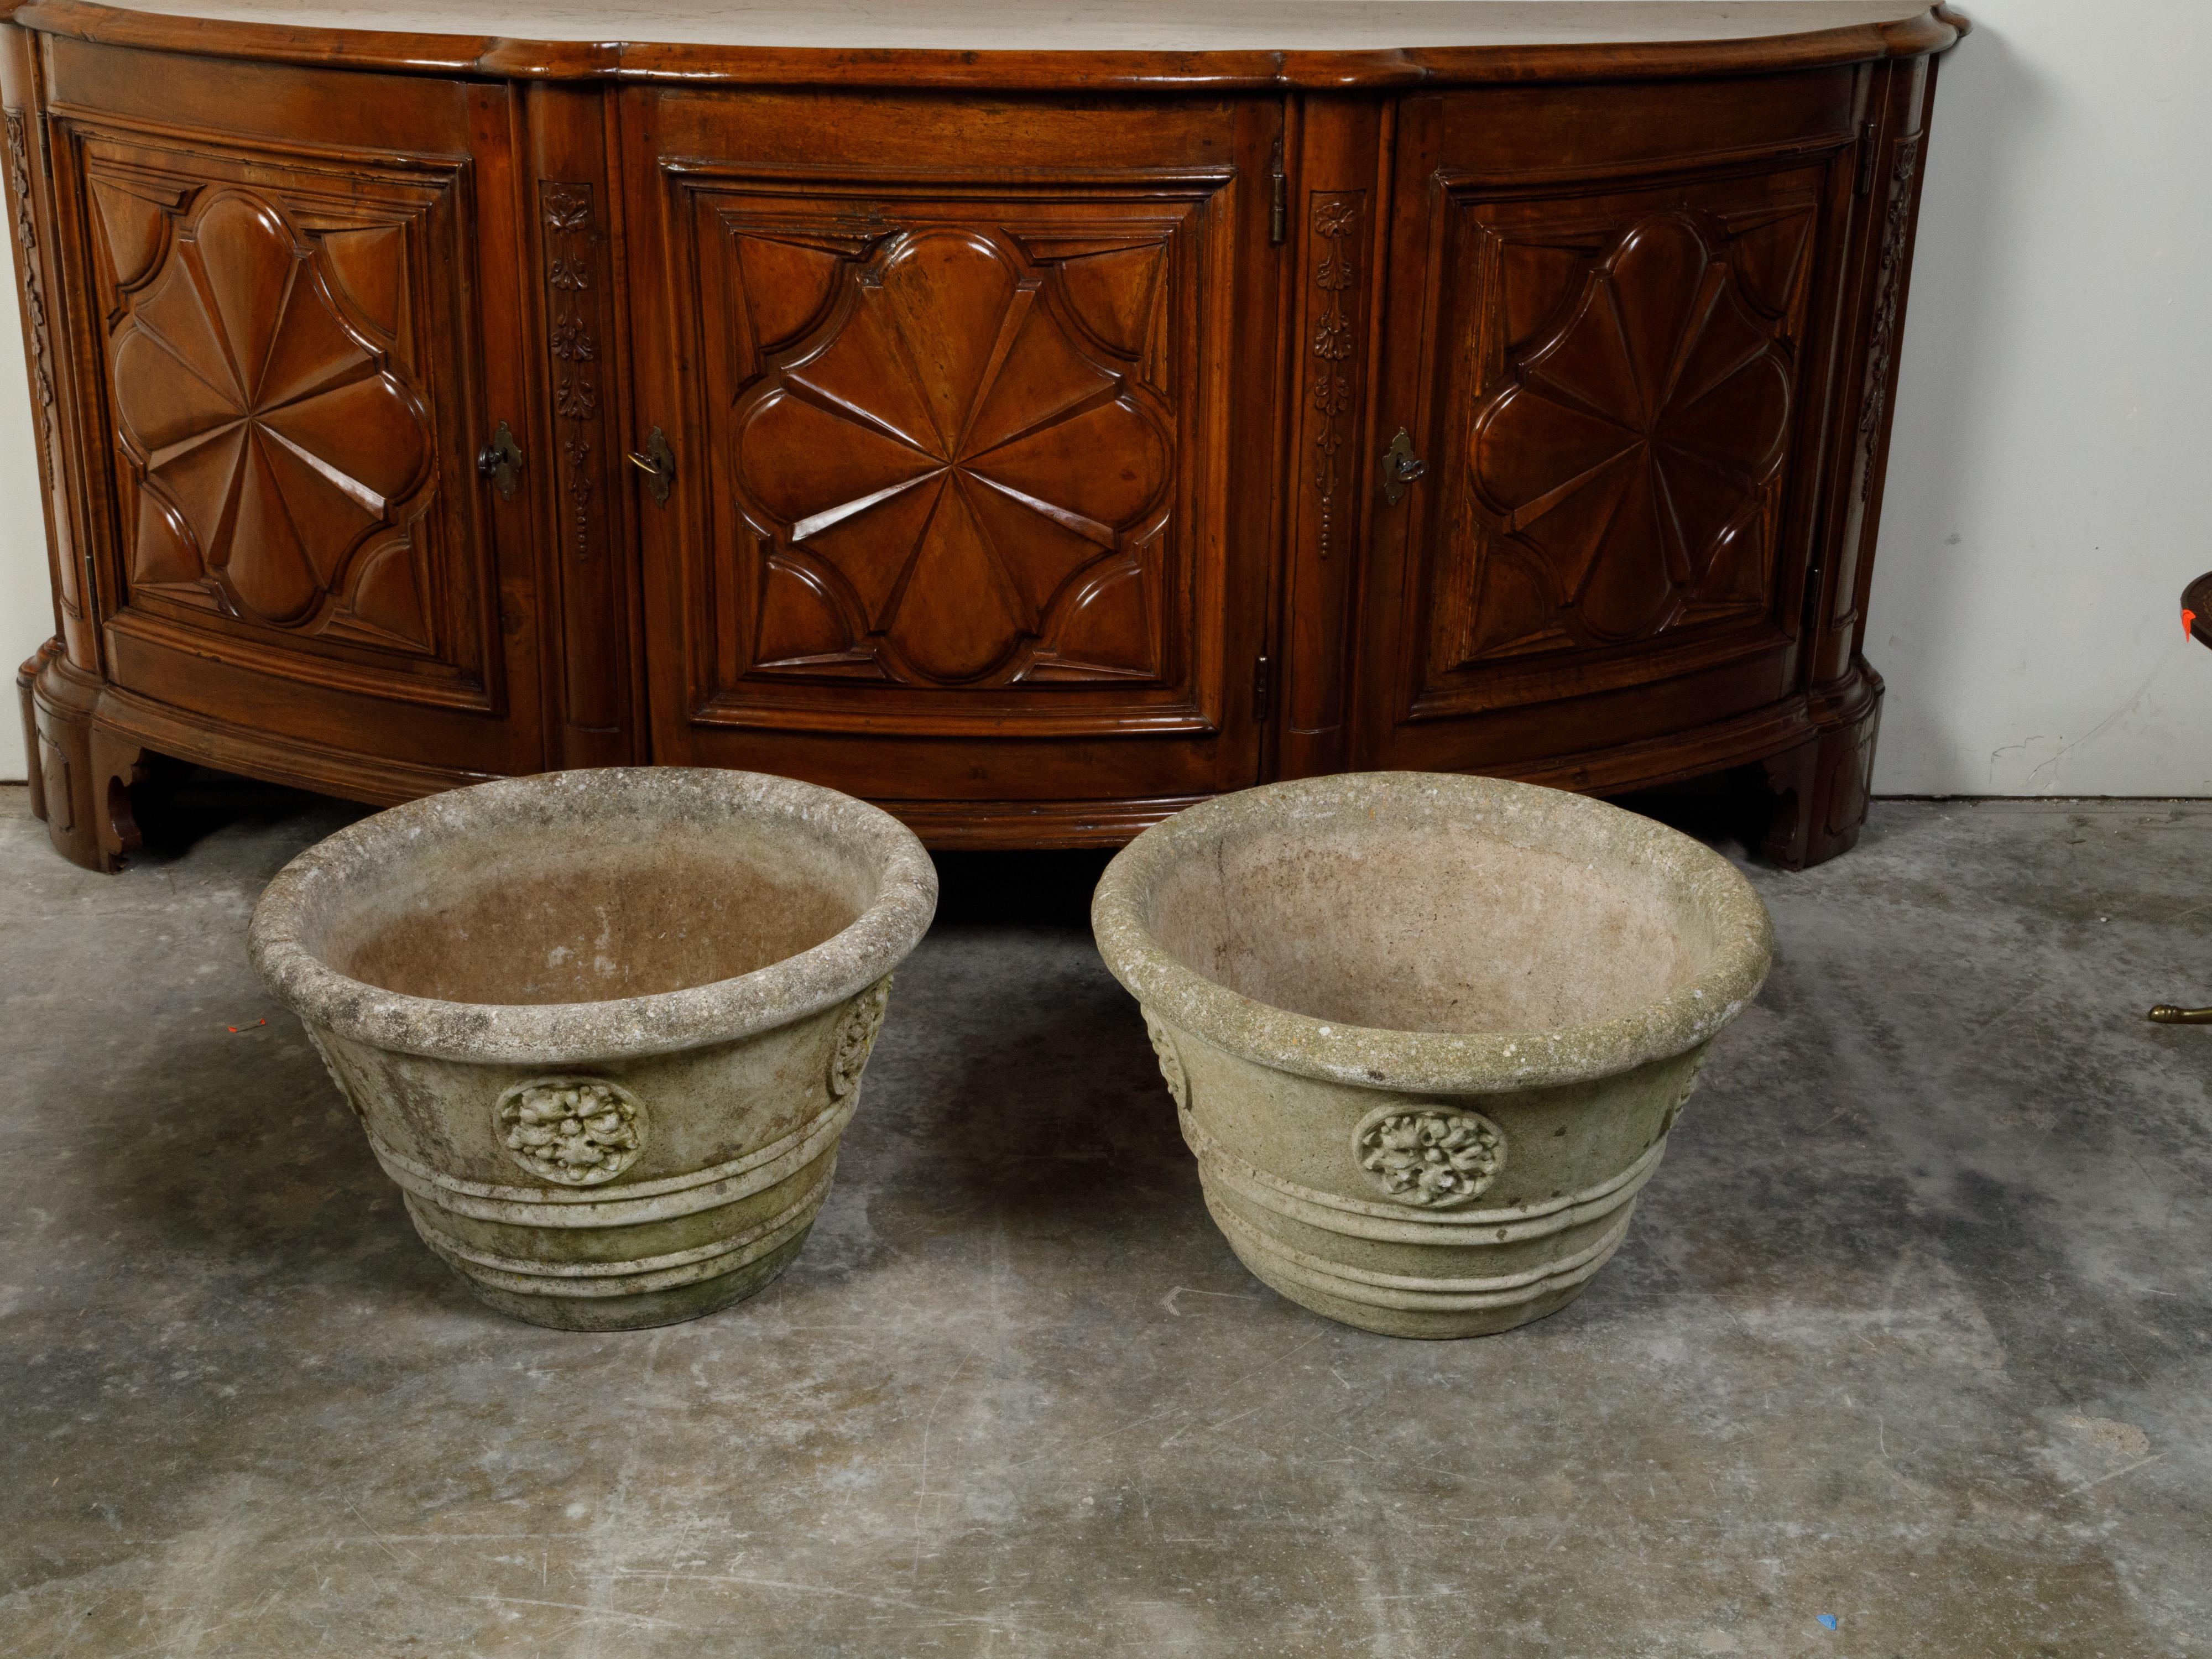 A pair of vintage cast stone planters from the mid 20th century, with rosette motifs. We have two pairs available, priced and sold $3,750 per pair. Created during the Midcentury period, each of this pair of planters features a circular tapering cast